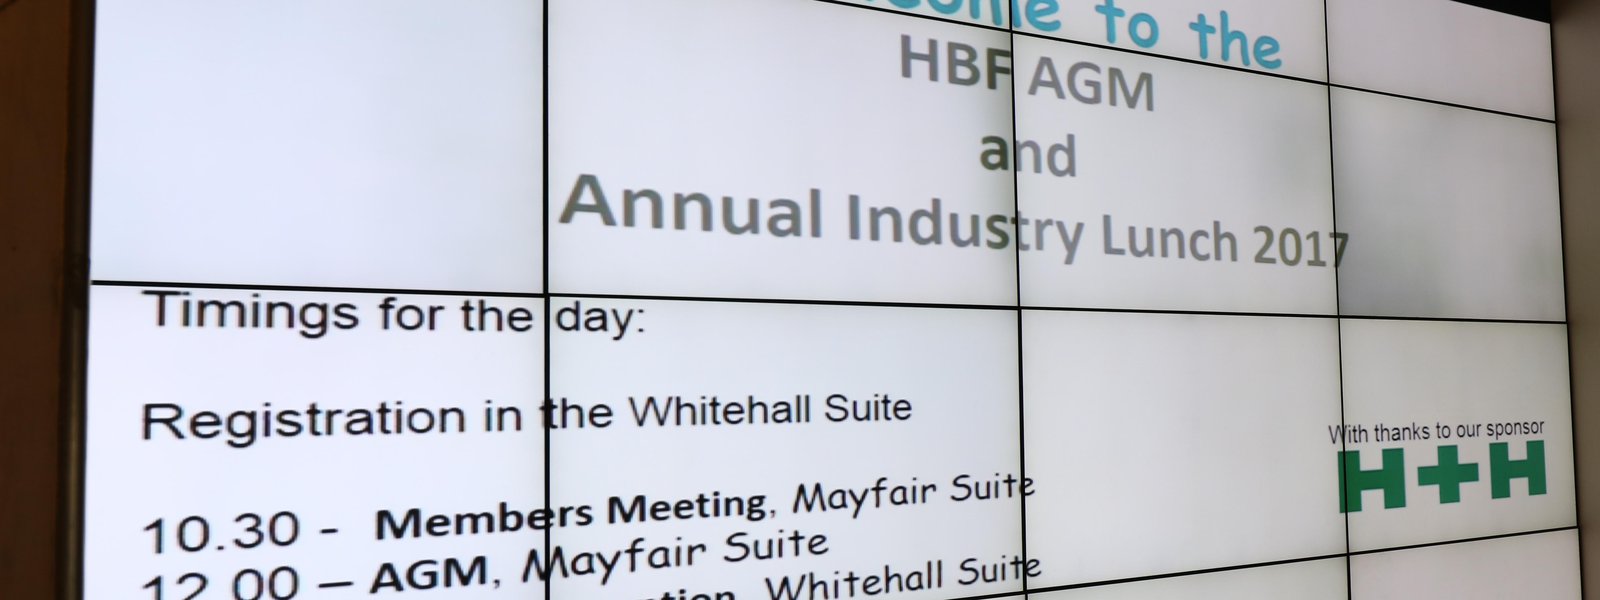 HBF AGM and Annual Lunch